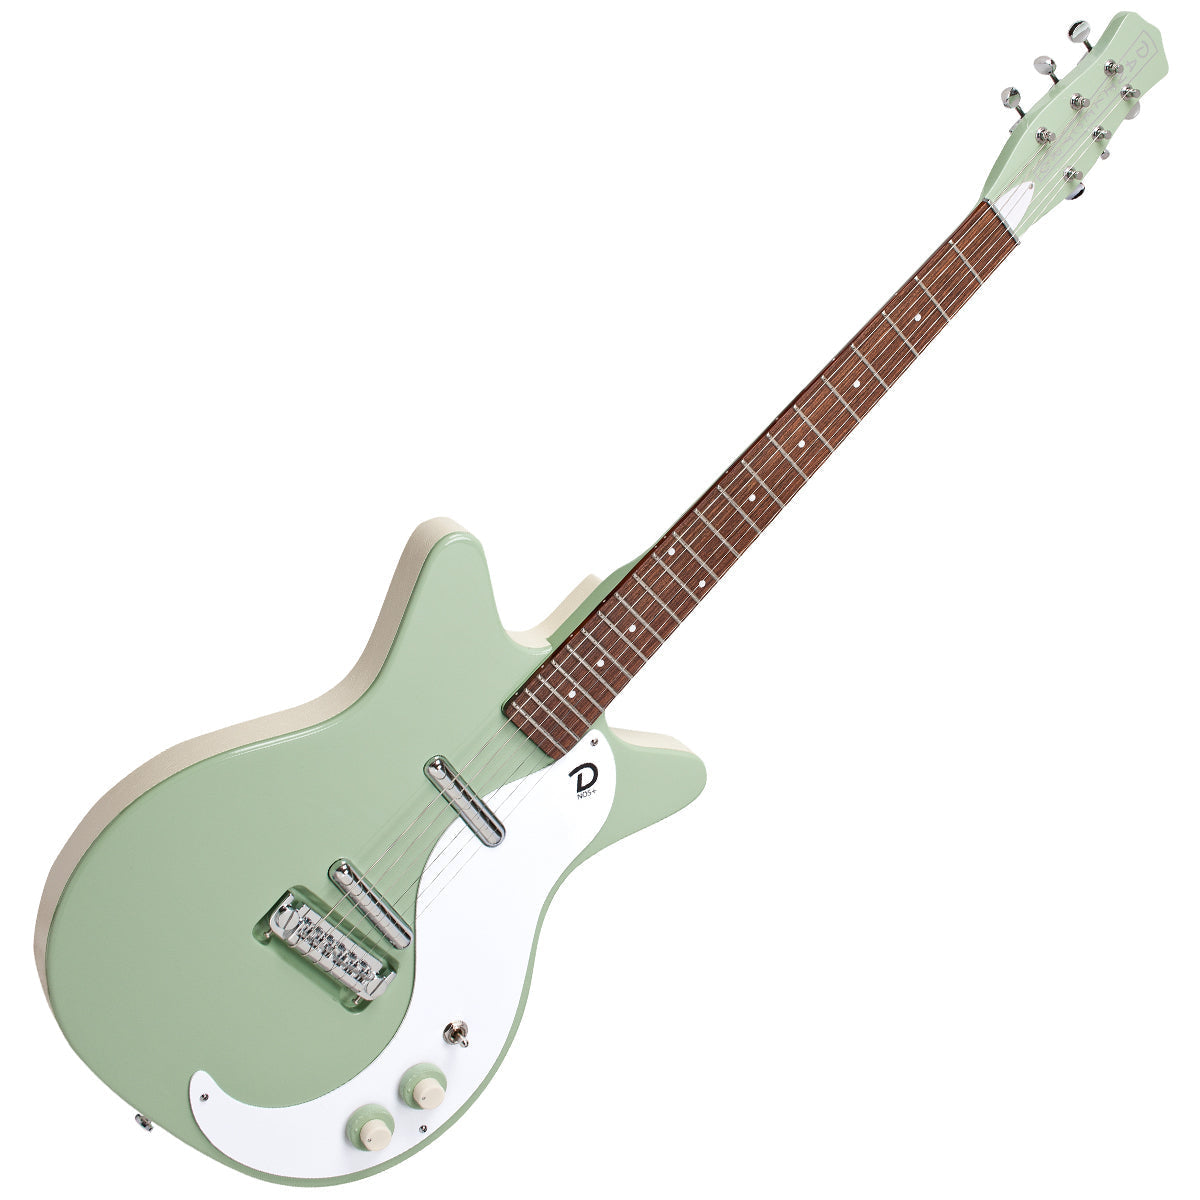 Danelectro '59M NOS Electric Guitar ~ Keen Green, Electric Guitar for sale at Richards Guitars.